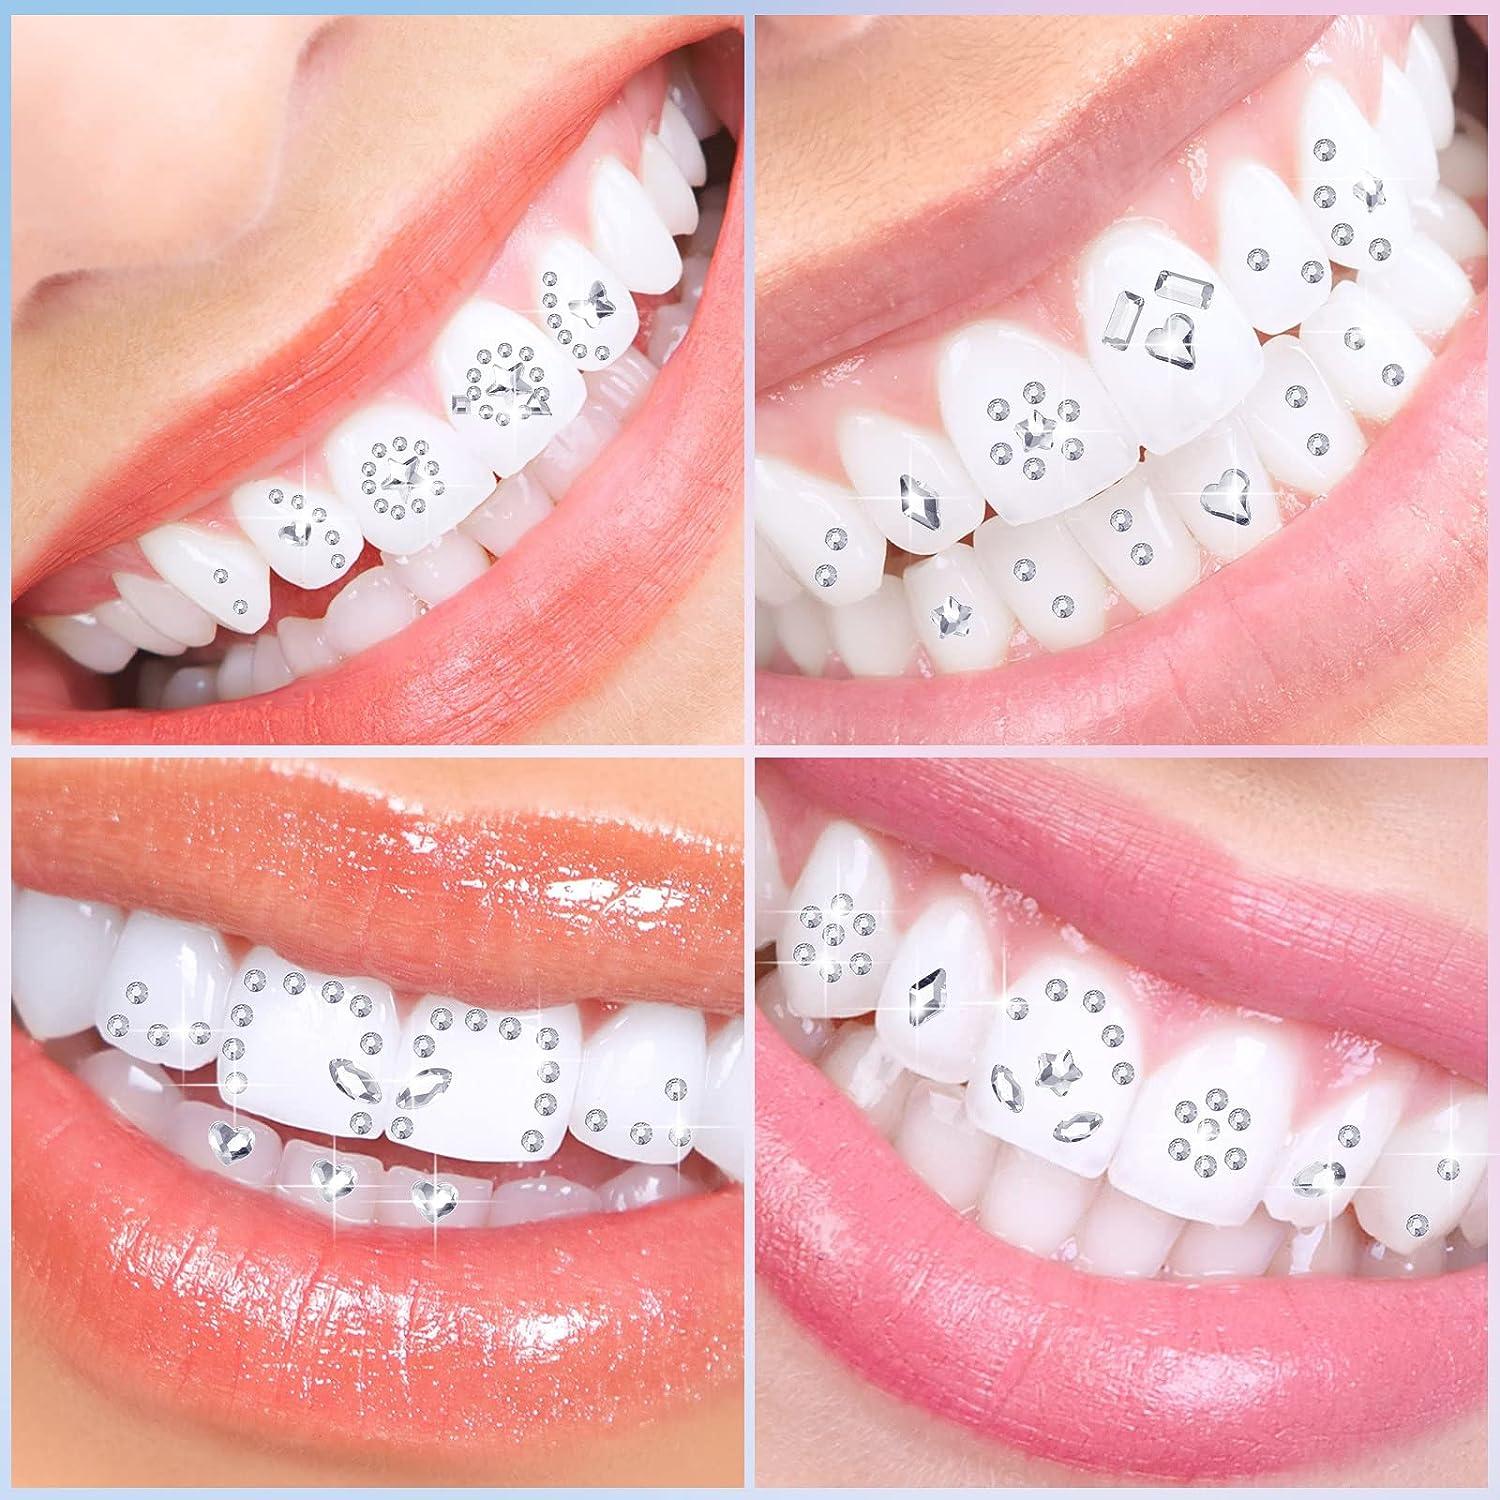  POPETPOP Teeth Jewelry, Tooth Gems Kit, Removable Tooth  Ornaments Teeth Diamond for DIY Tooth Decor Nails Decor 10pcs : Health &  Household